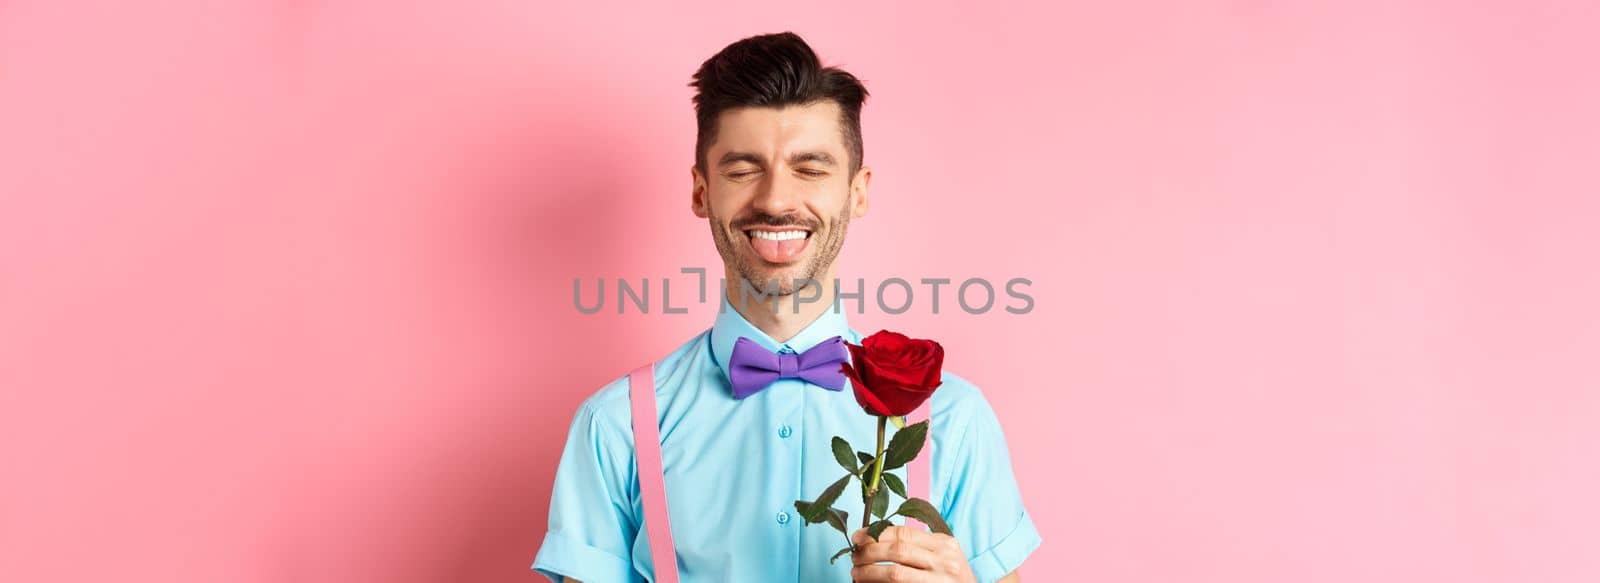 Happy man showing tongue and smiling, holding red rose for girlfriend on Valentines day, enjoying romantic date, pink background by Benzoix